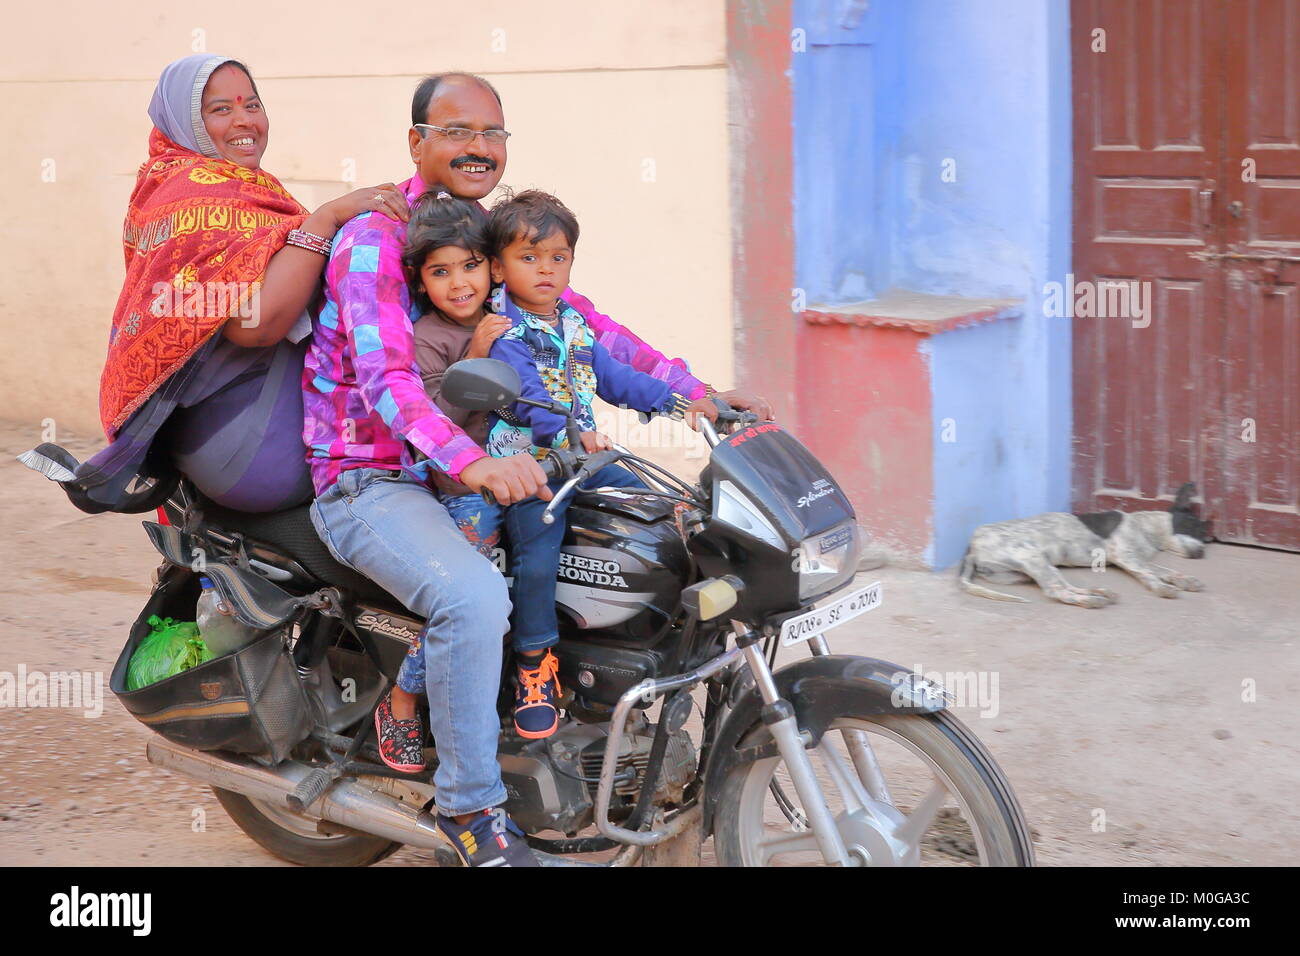 BUNDI, RAJASTHAN, INDIA - DECEMBER 10, 2017: Local transport with a smiling family travelling on a motorcycle in the streets of the old town Stock Photo